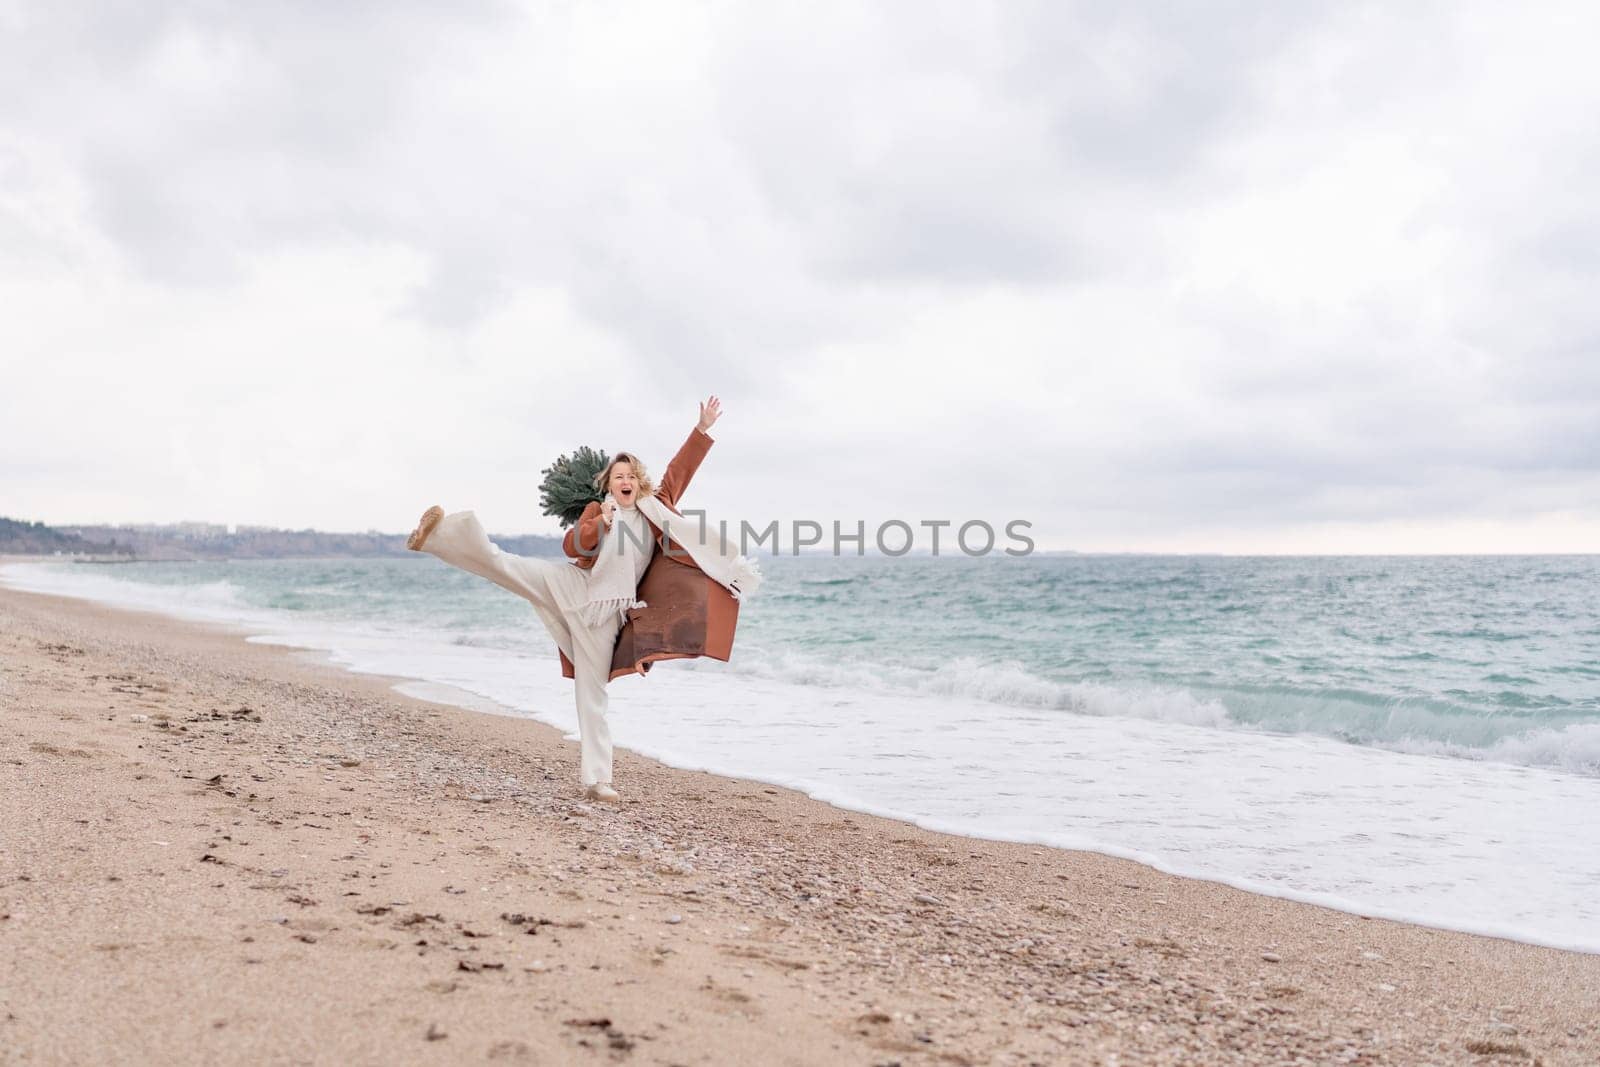 Blond woman Christmas sea. Christmas portrait of a happy woman walking along the beach and holding a Christmas tree on her shoulder. She is wearing a brown coat and a white suit